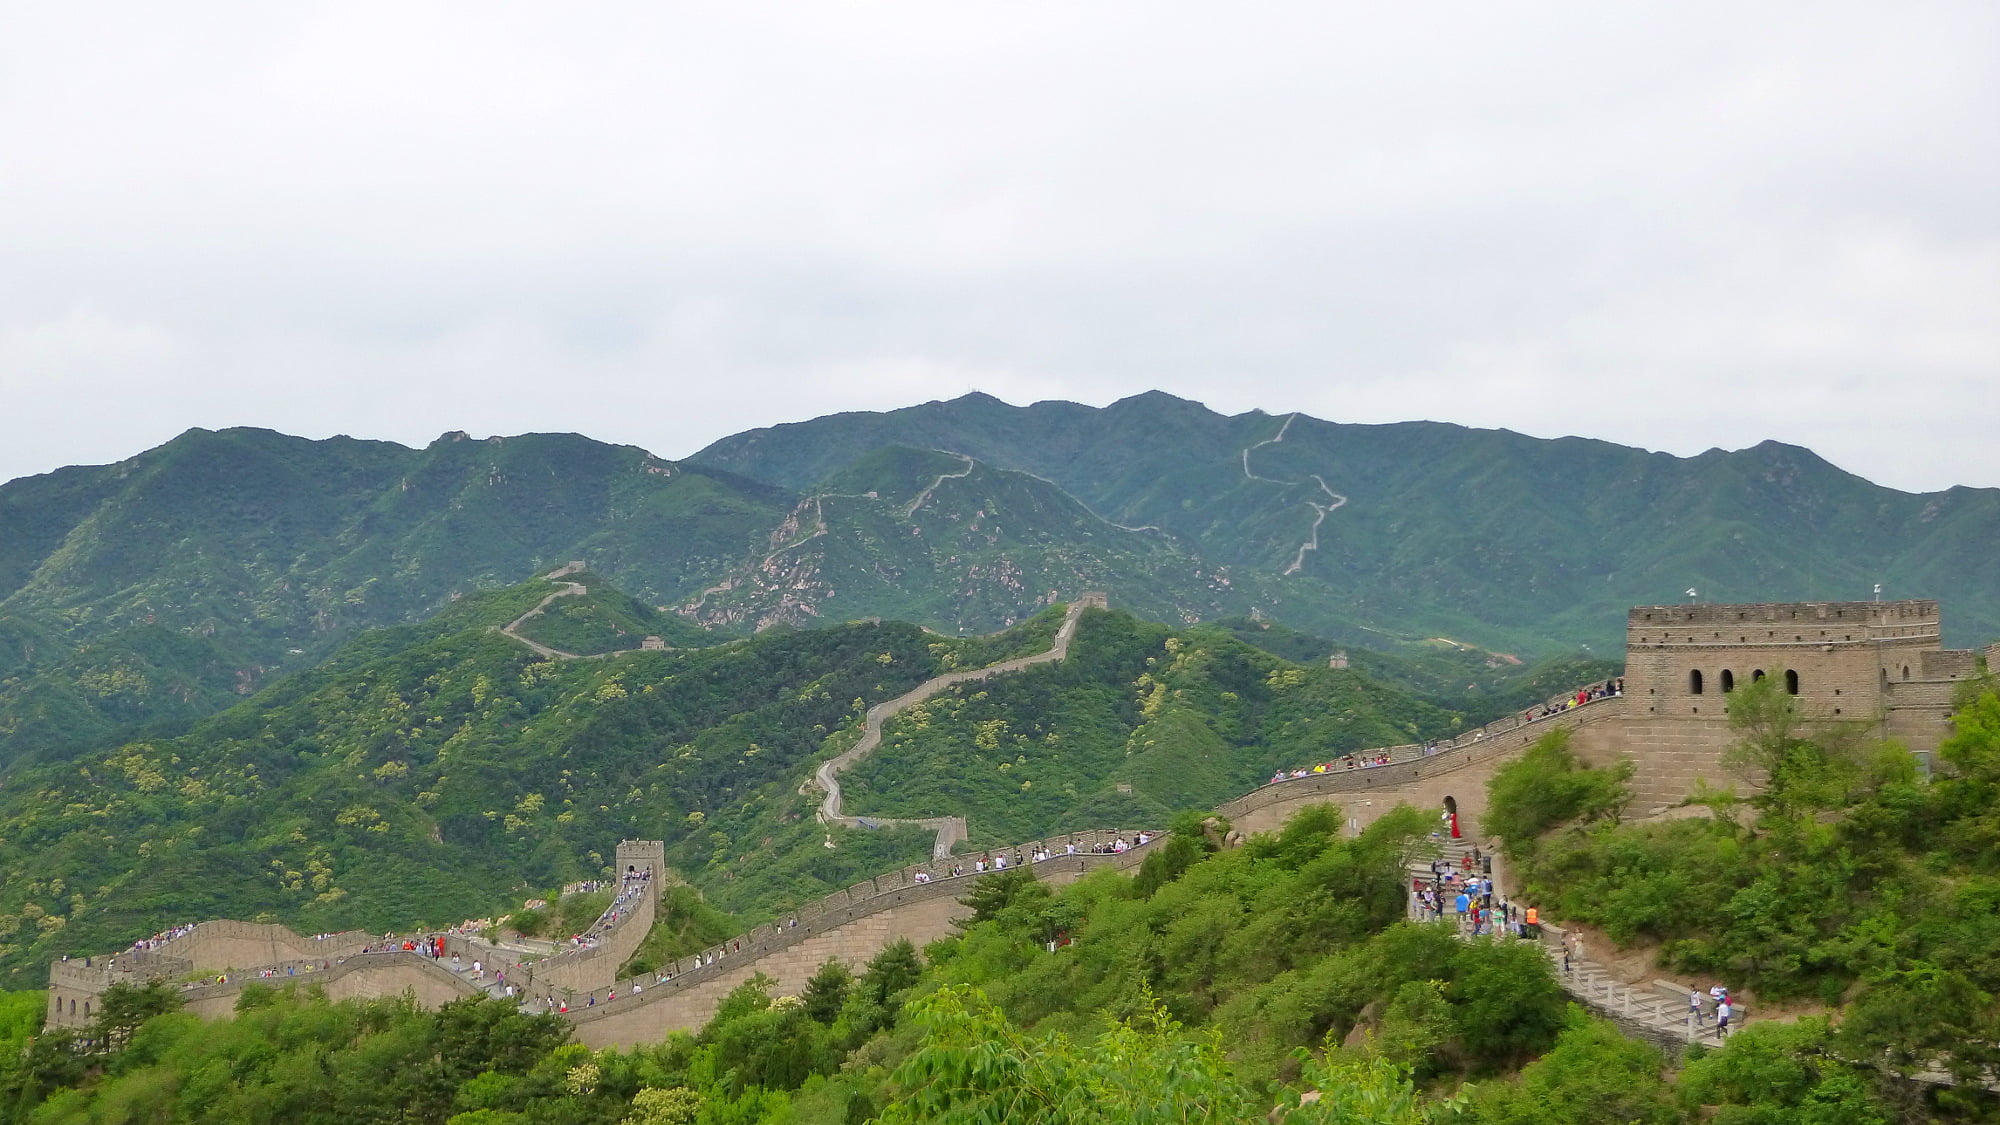 The Great Wall of China in Badaling with mountains and cloudy sky in the background.